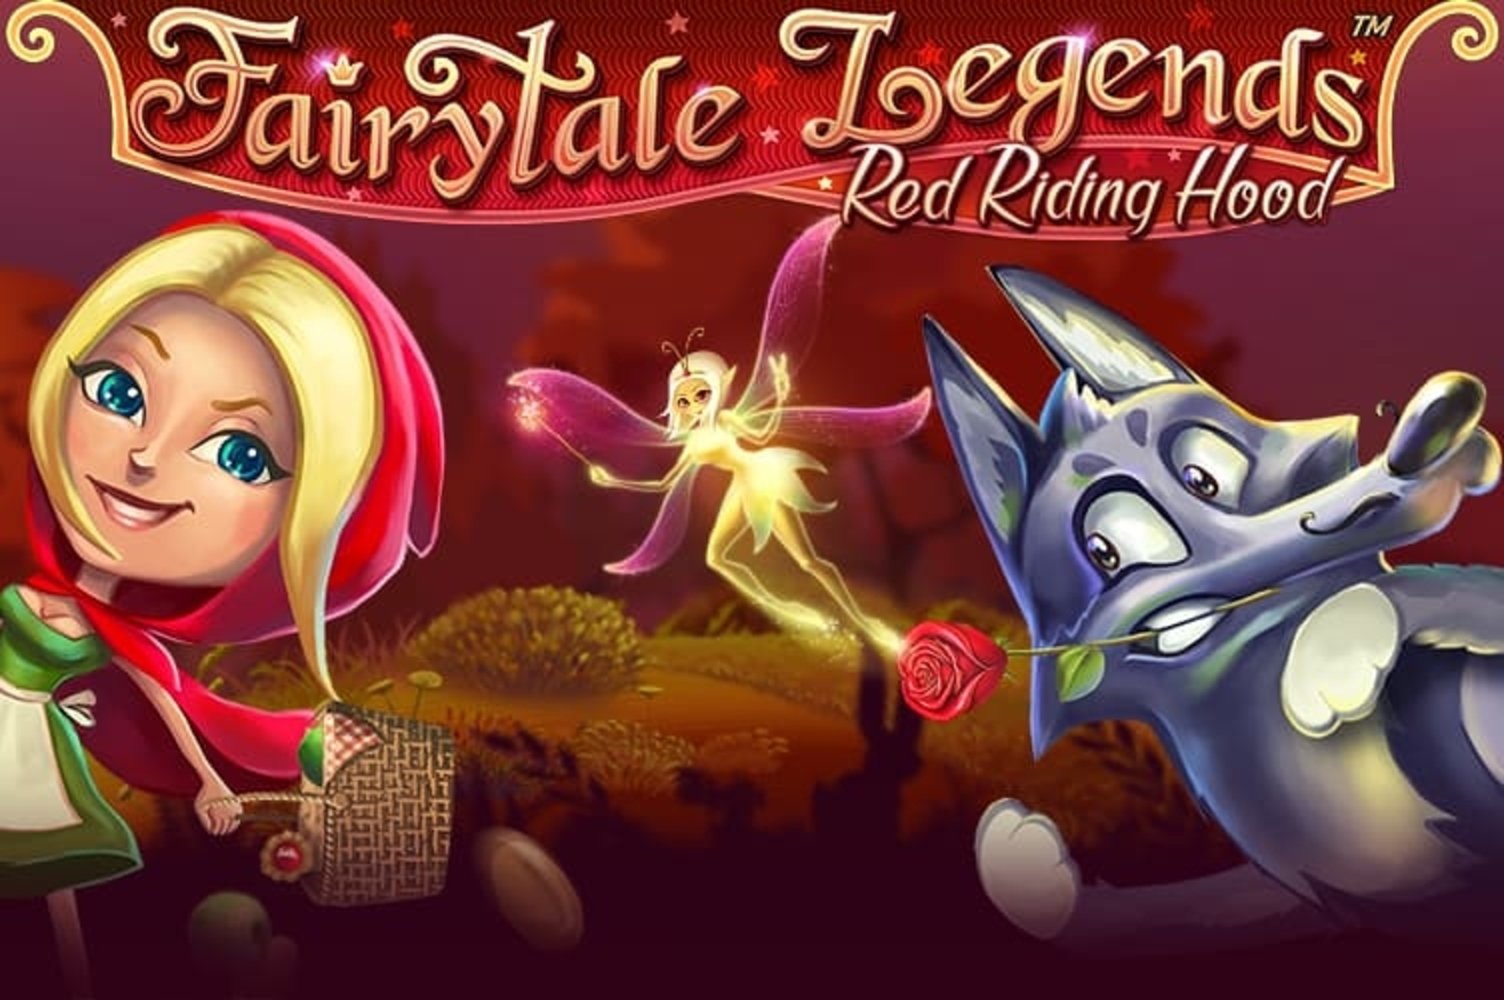 The Fairytale Legends: Red Riding Hood Online Slot Demo Game by NetEnt